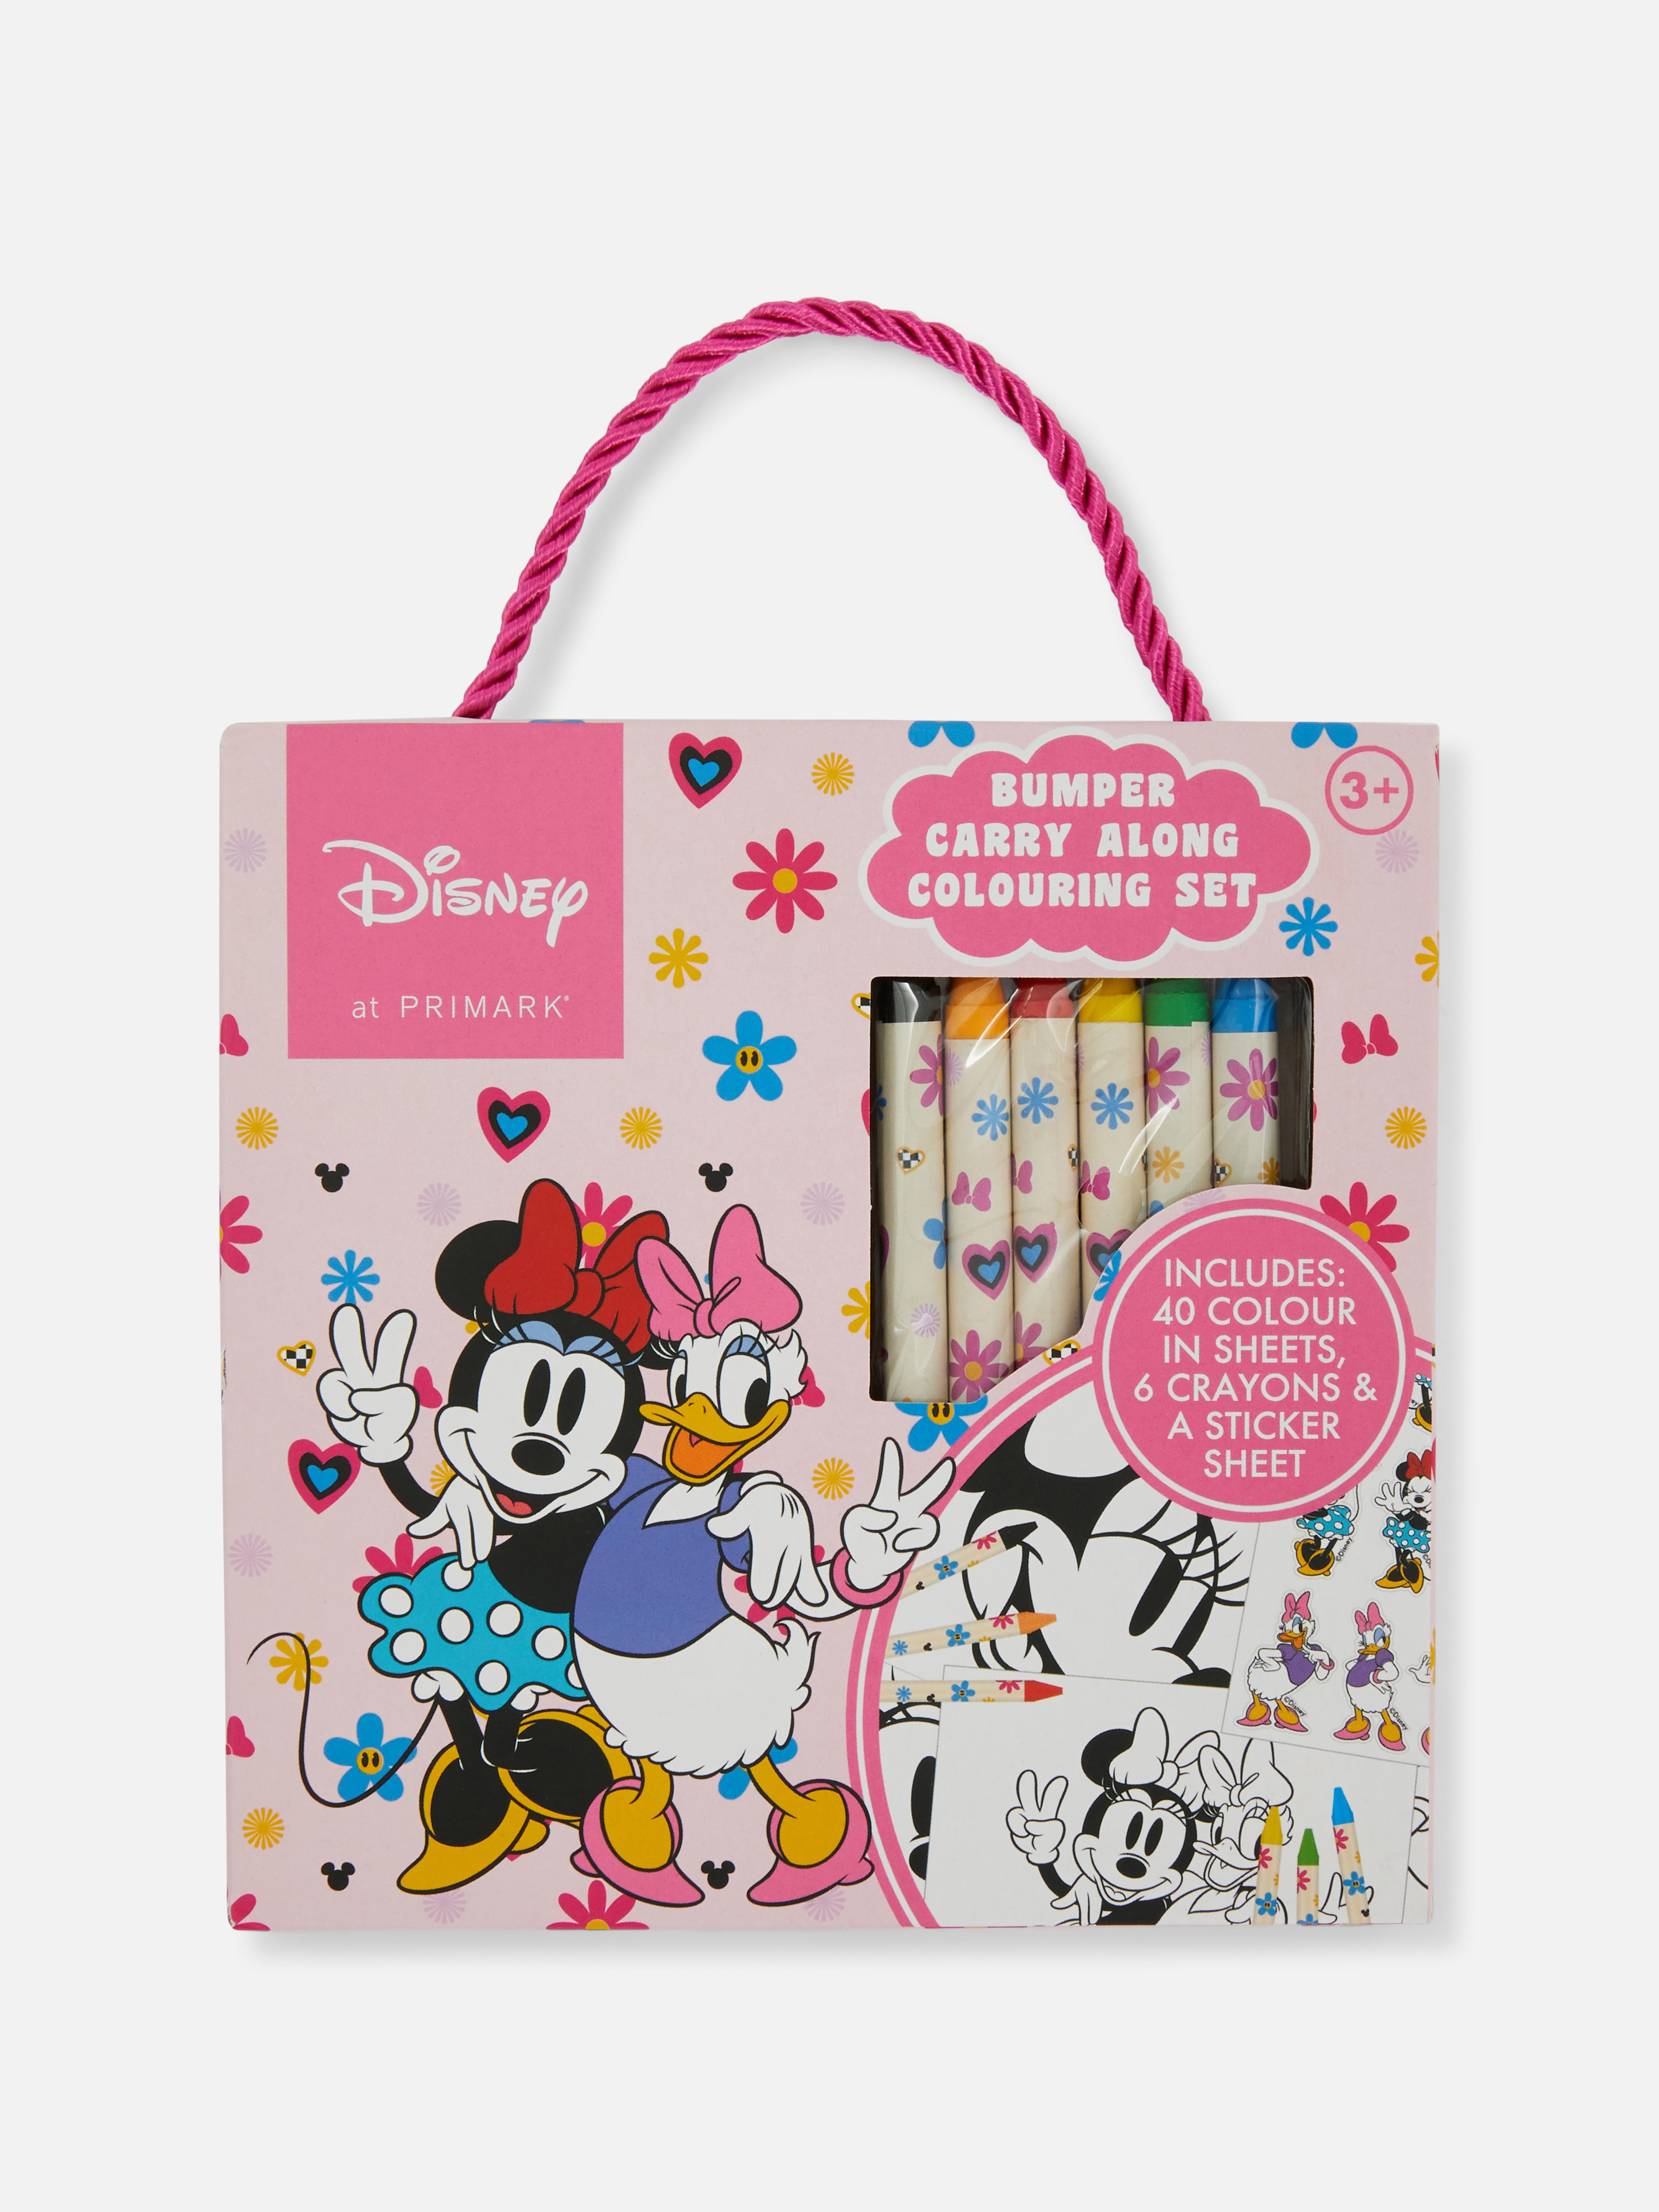 Disney’s Minnie Mouse and Daisy Duck Carry-Along Colouring Set